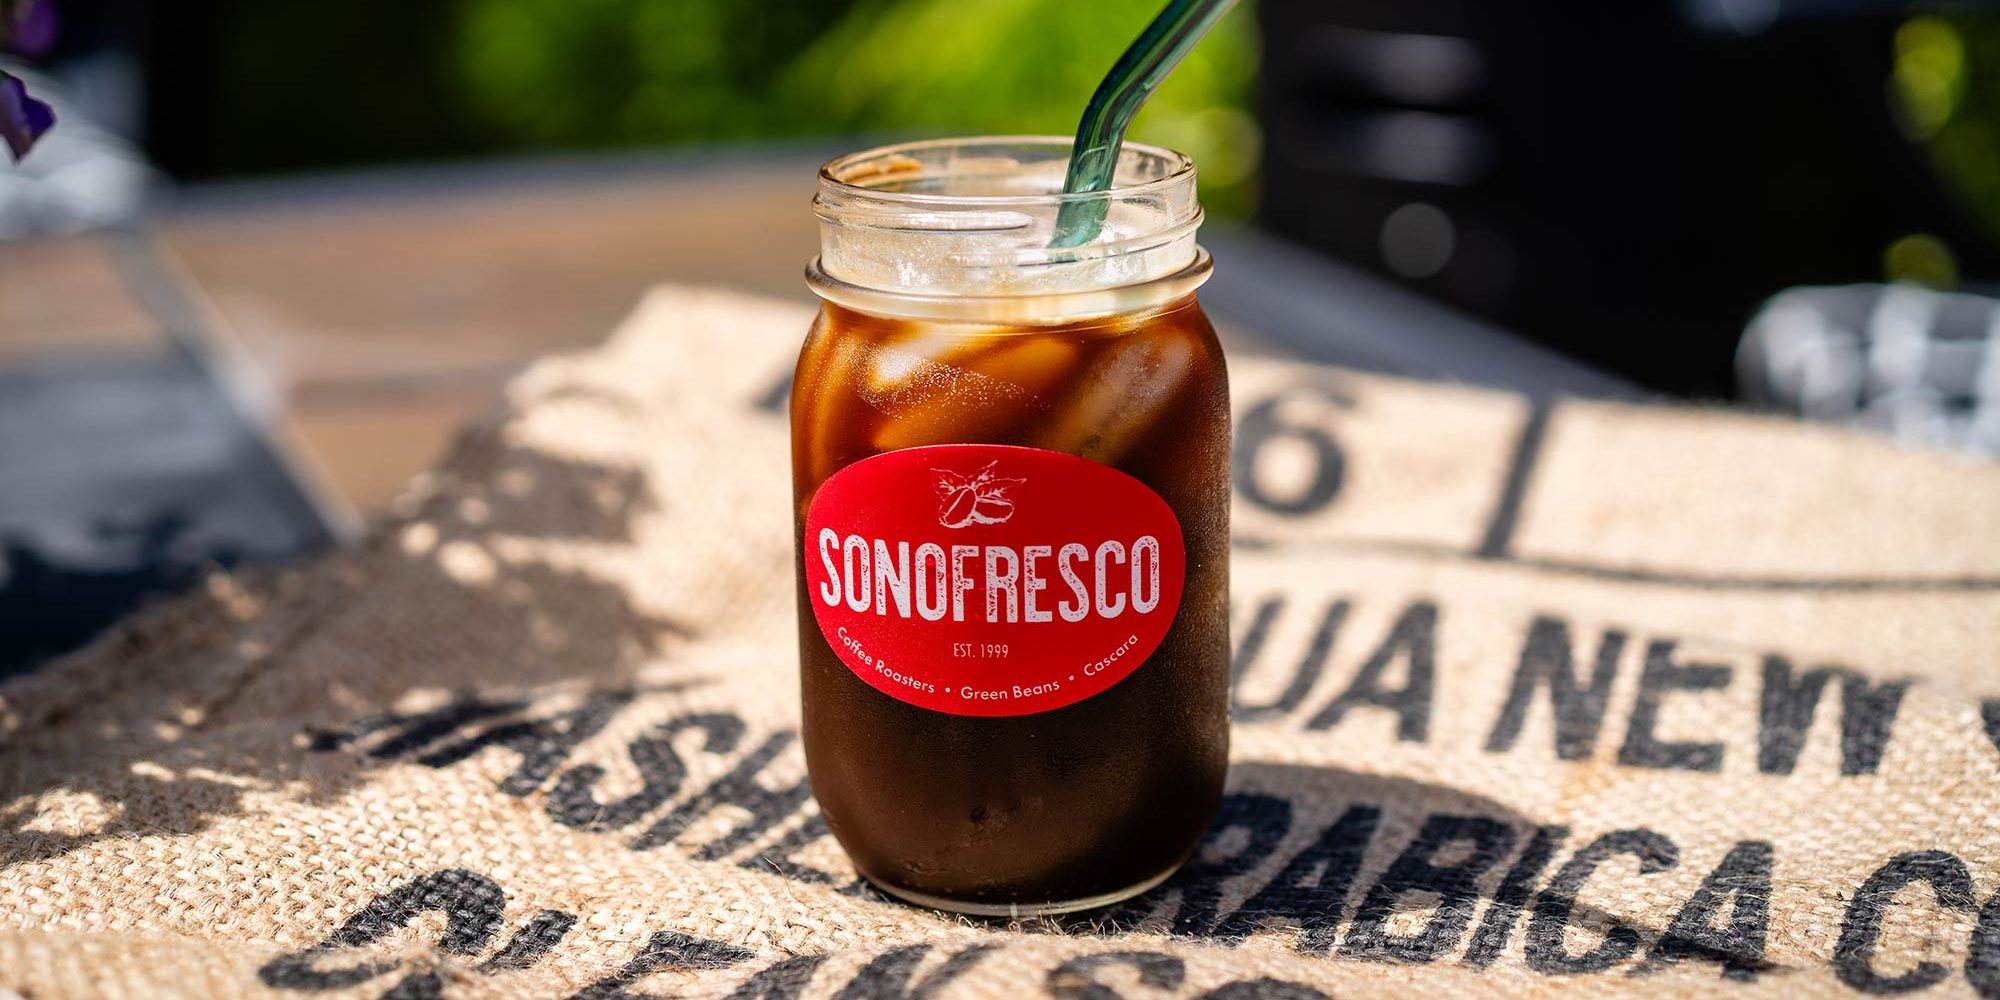 A glass of iced coffee on a green coffee burlap bag under the sunlight, condensation forming on the glass, ice cubes melting, creating a refreshing scene.